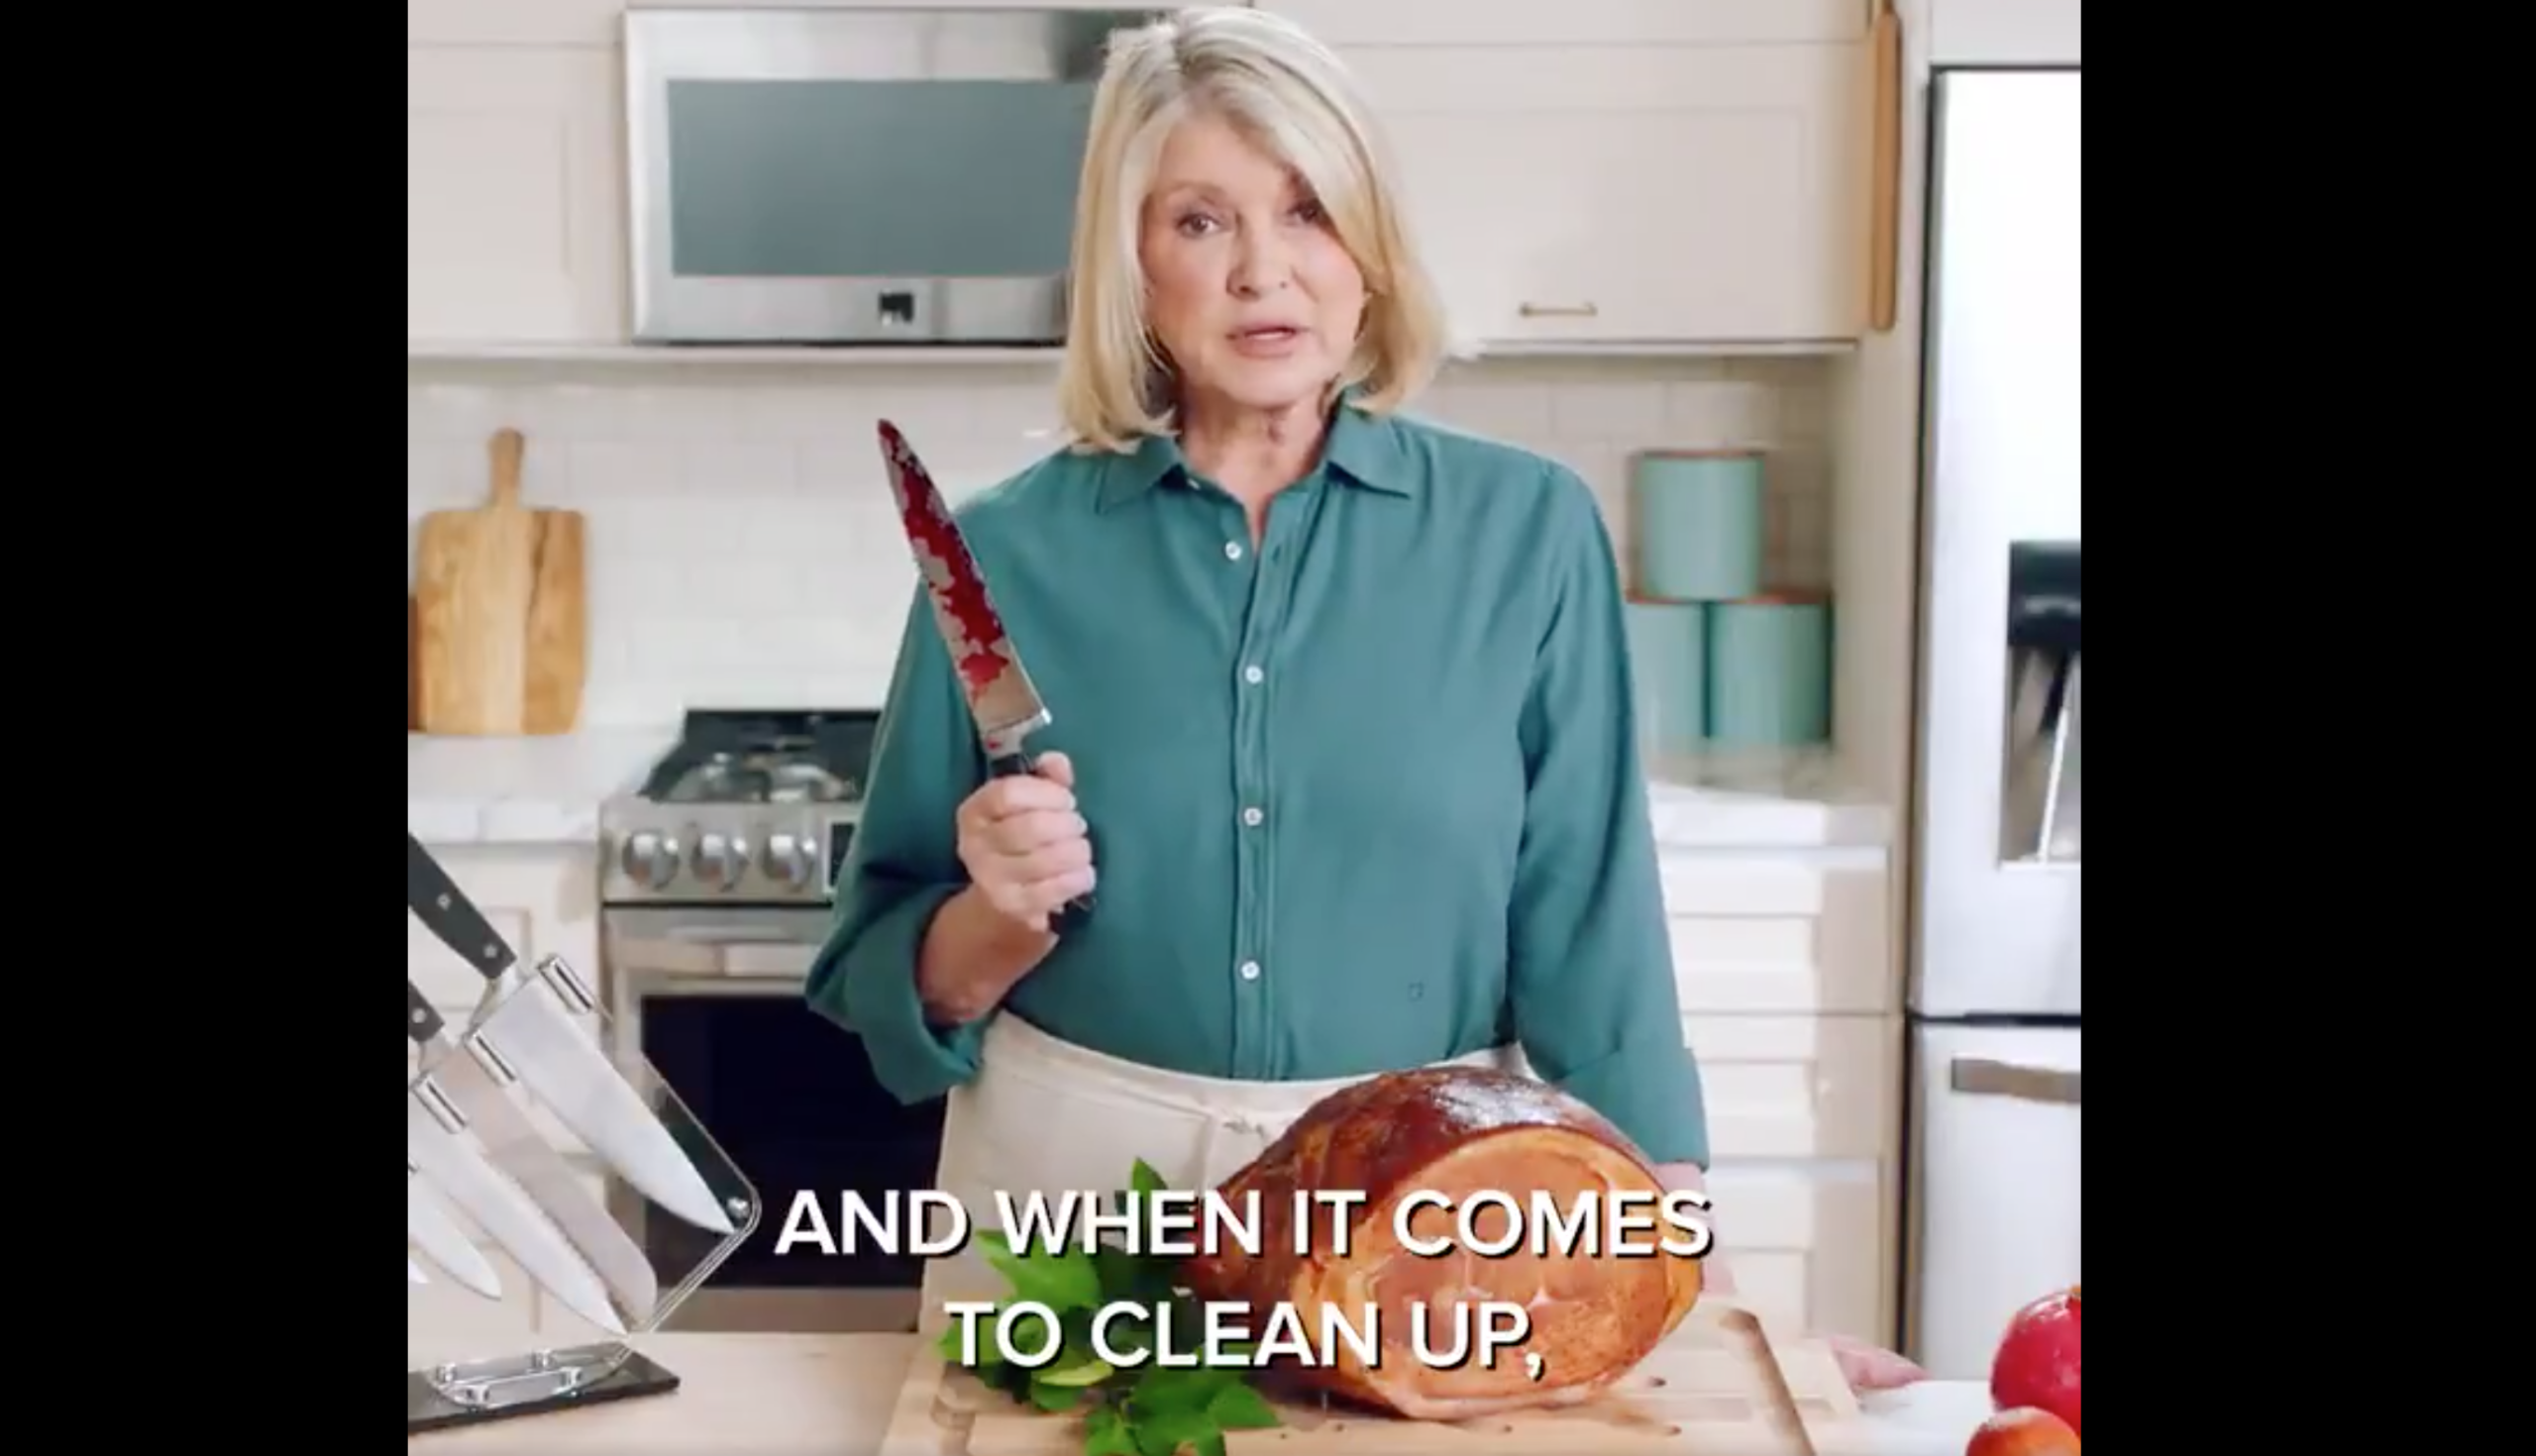 This 'Knives Out' Promo With Martha Stewart Is Pure Genius